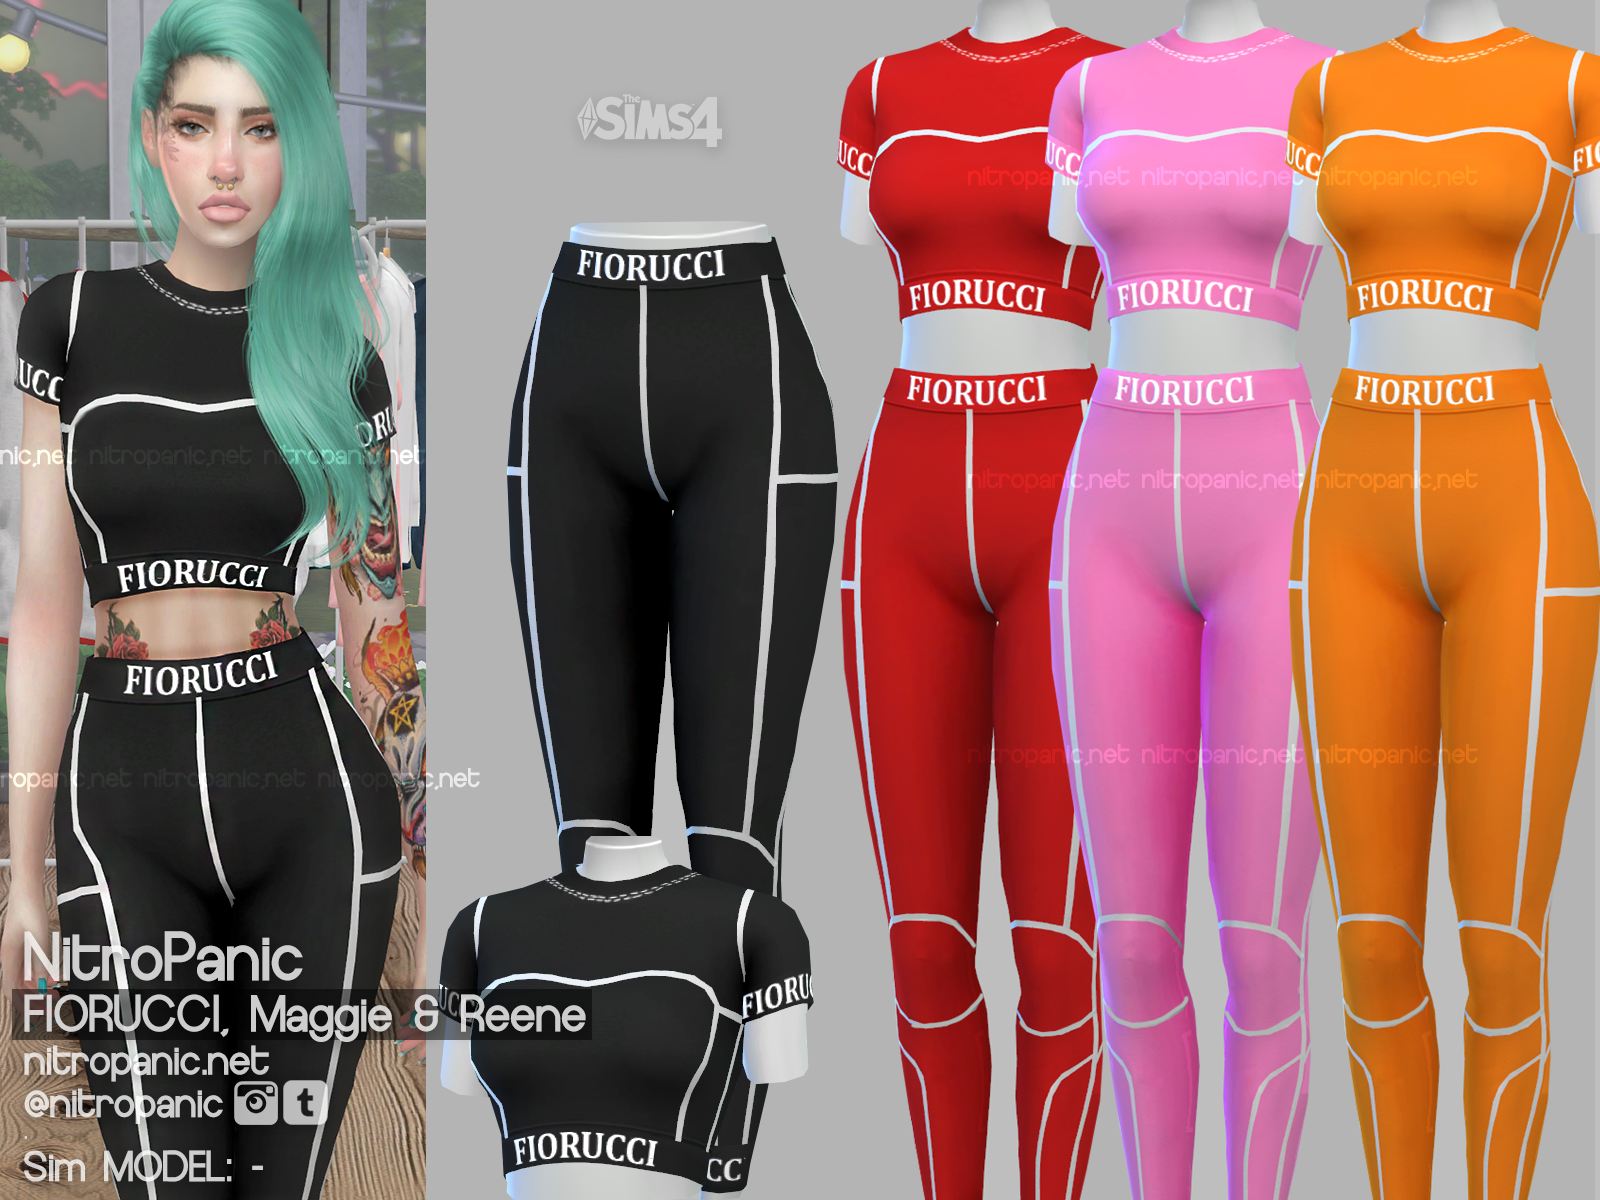 FIORUCCl, Maggie & Reene Set for The Sims 4